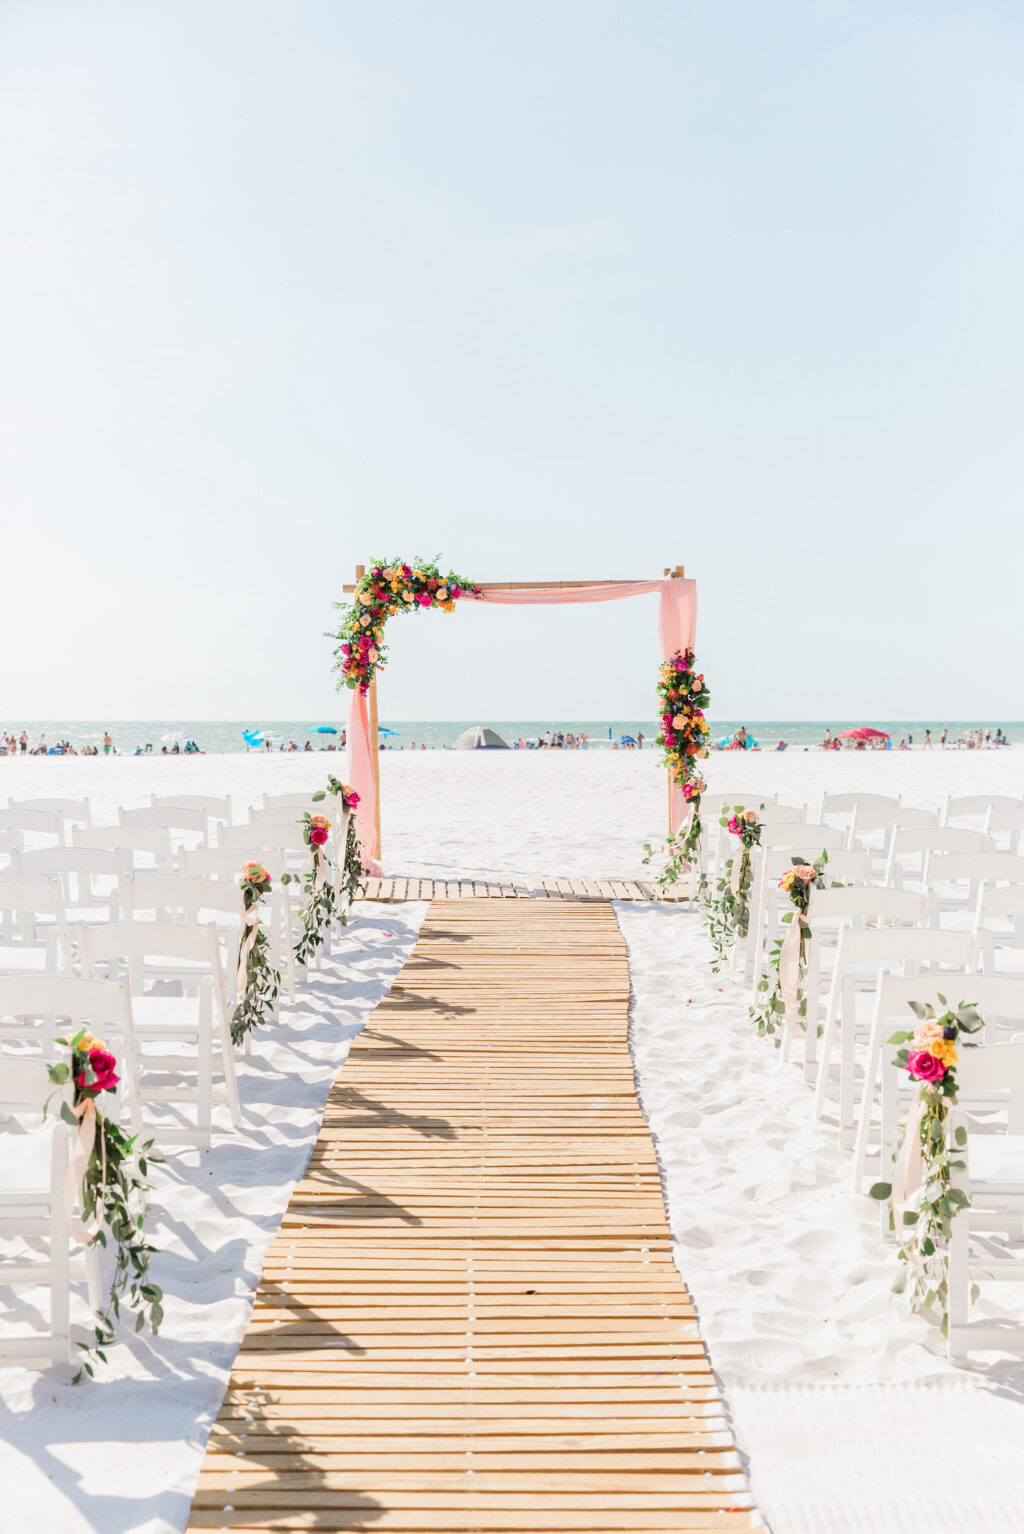 Outdoor Beachfront Wedding Ceremony with Bamboo Runner and Pink Alter Drapery | Hilton Clearwater Beach Wedding Ceremony